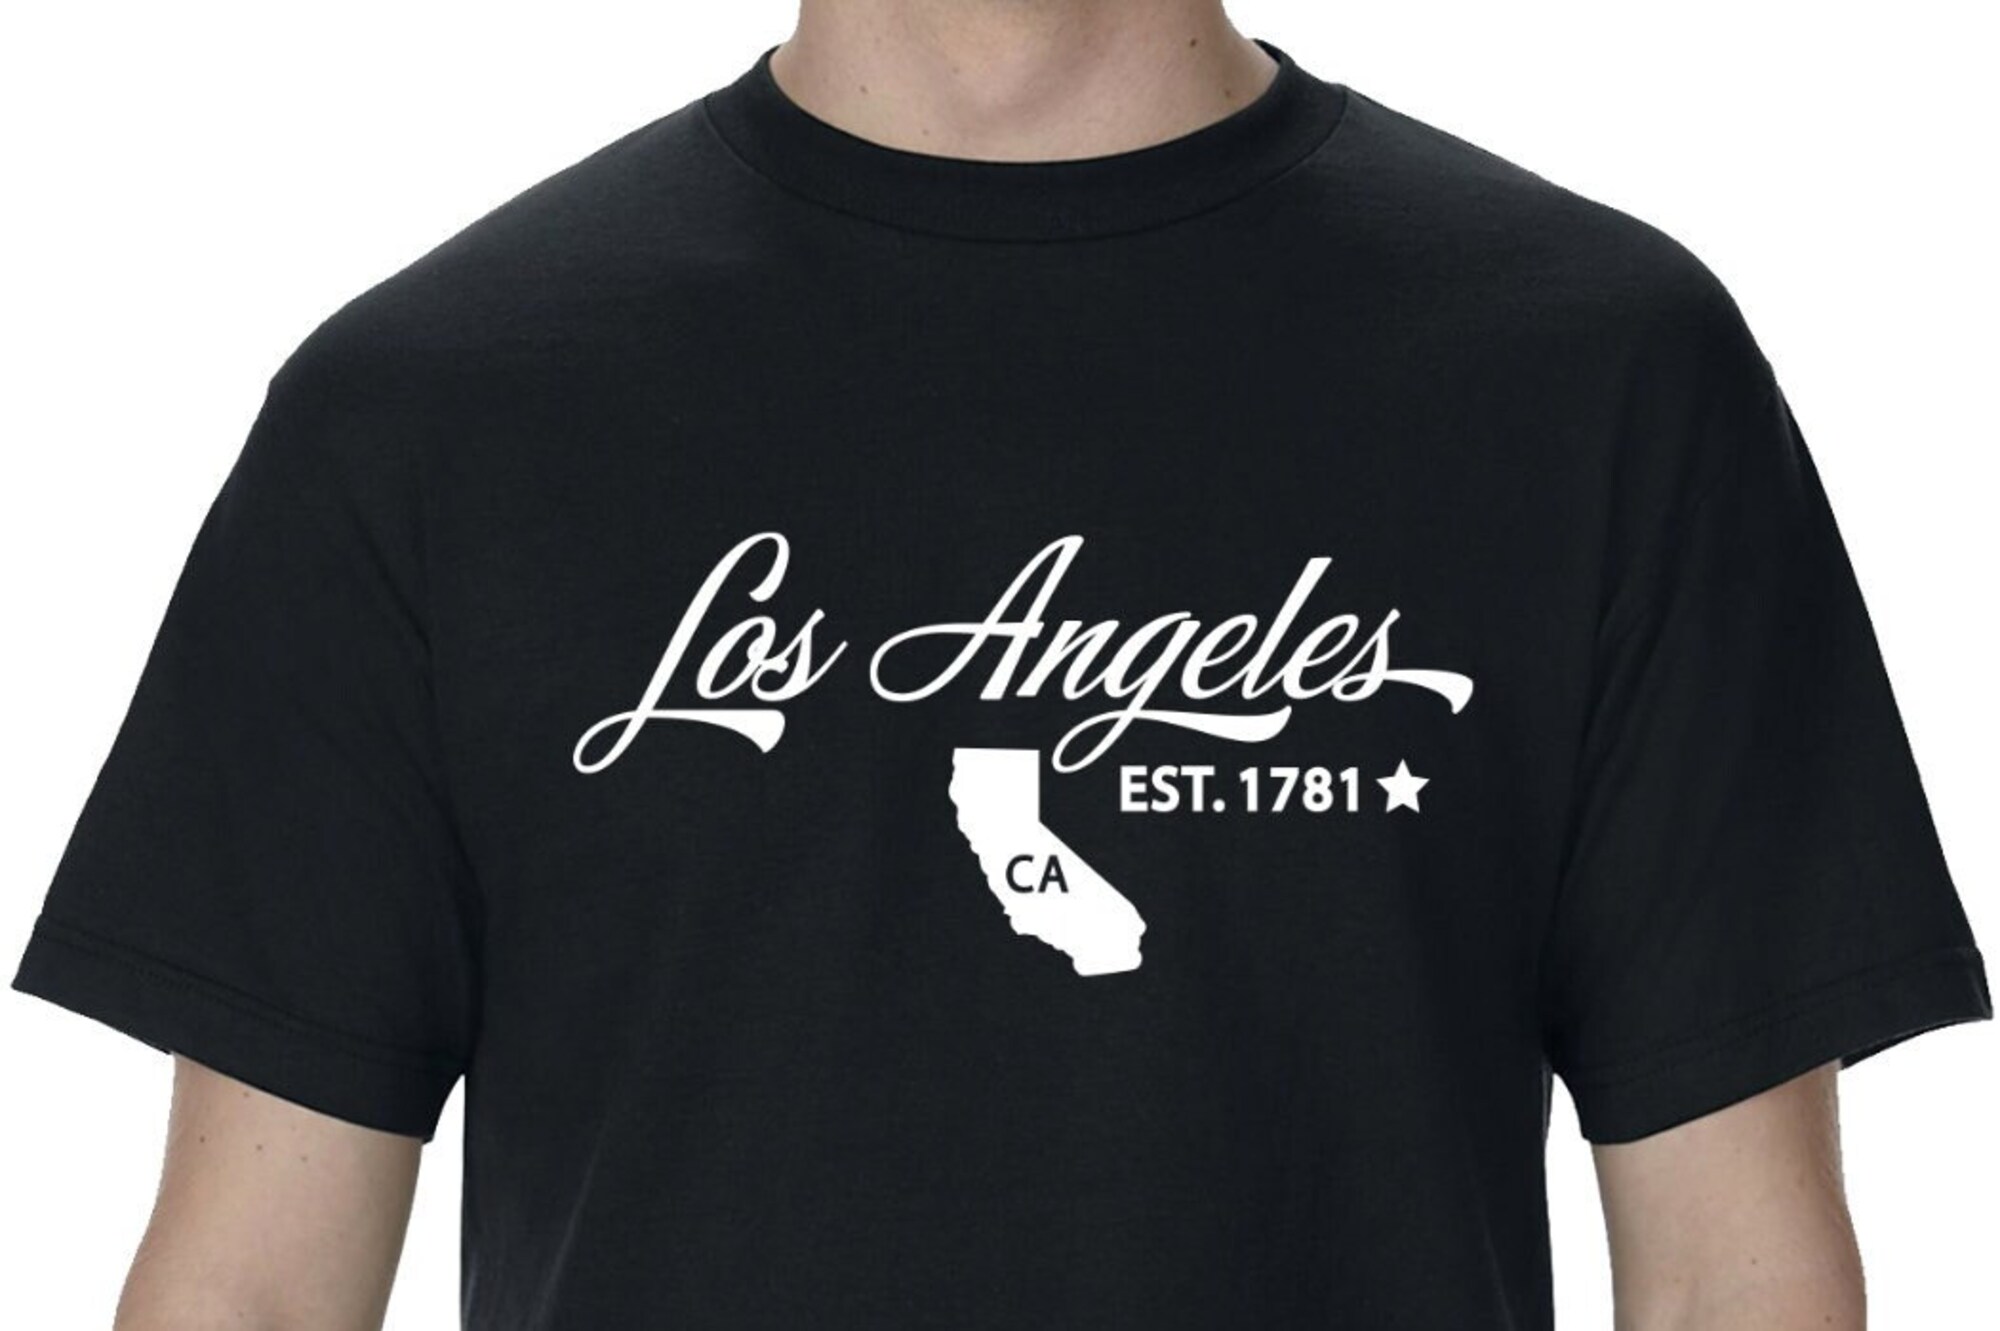 Discover Los Angeles California T-Shirt Short Sleeve Graphic tee